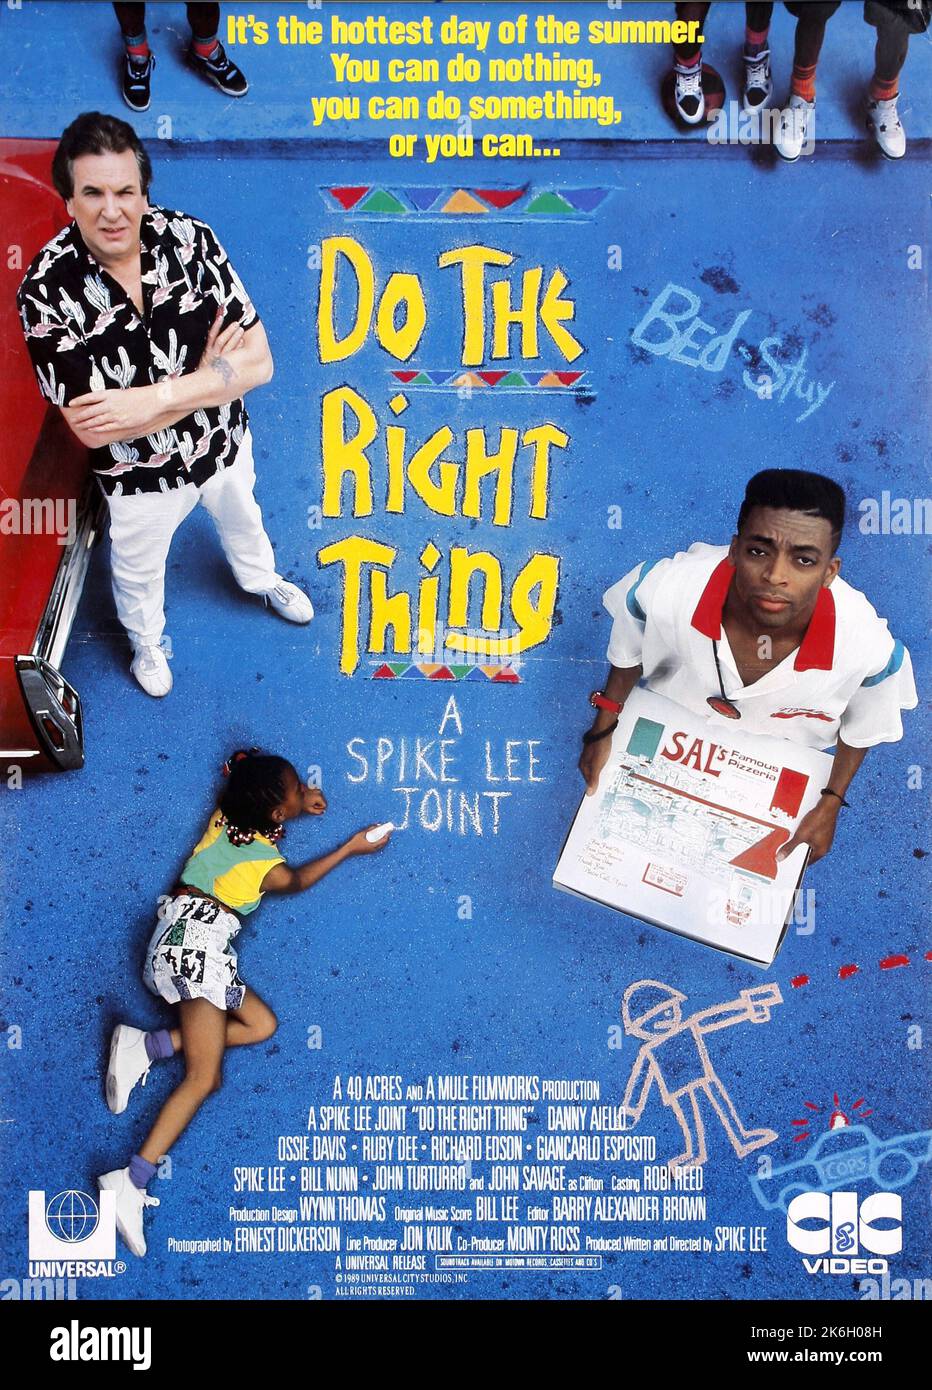 https://c8.alamy.com/comp/2K6H08H/do-the-right-thing-poster-2K6H08H.jpg